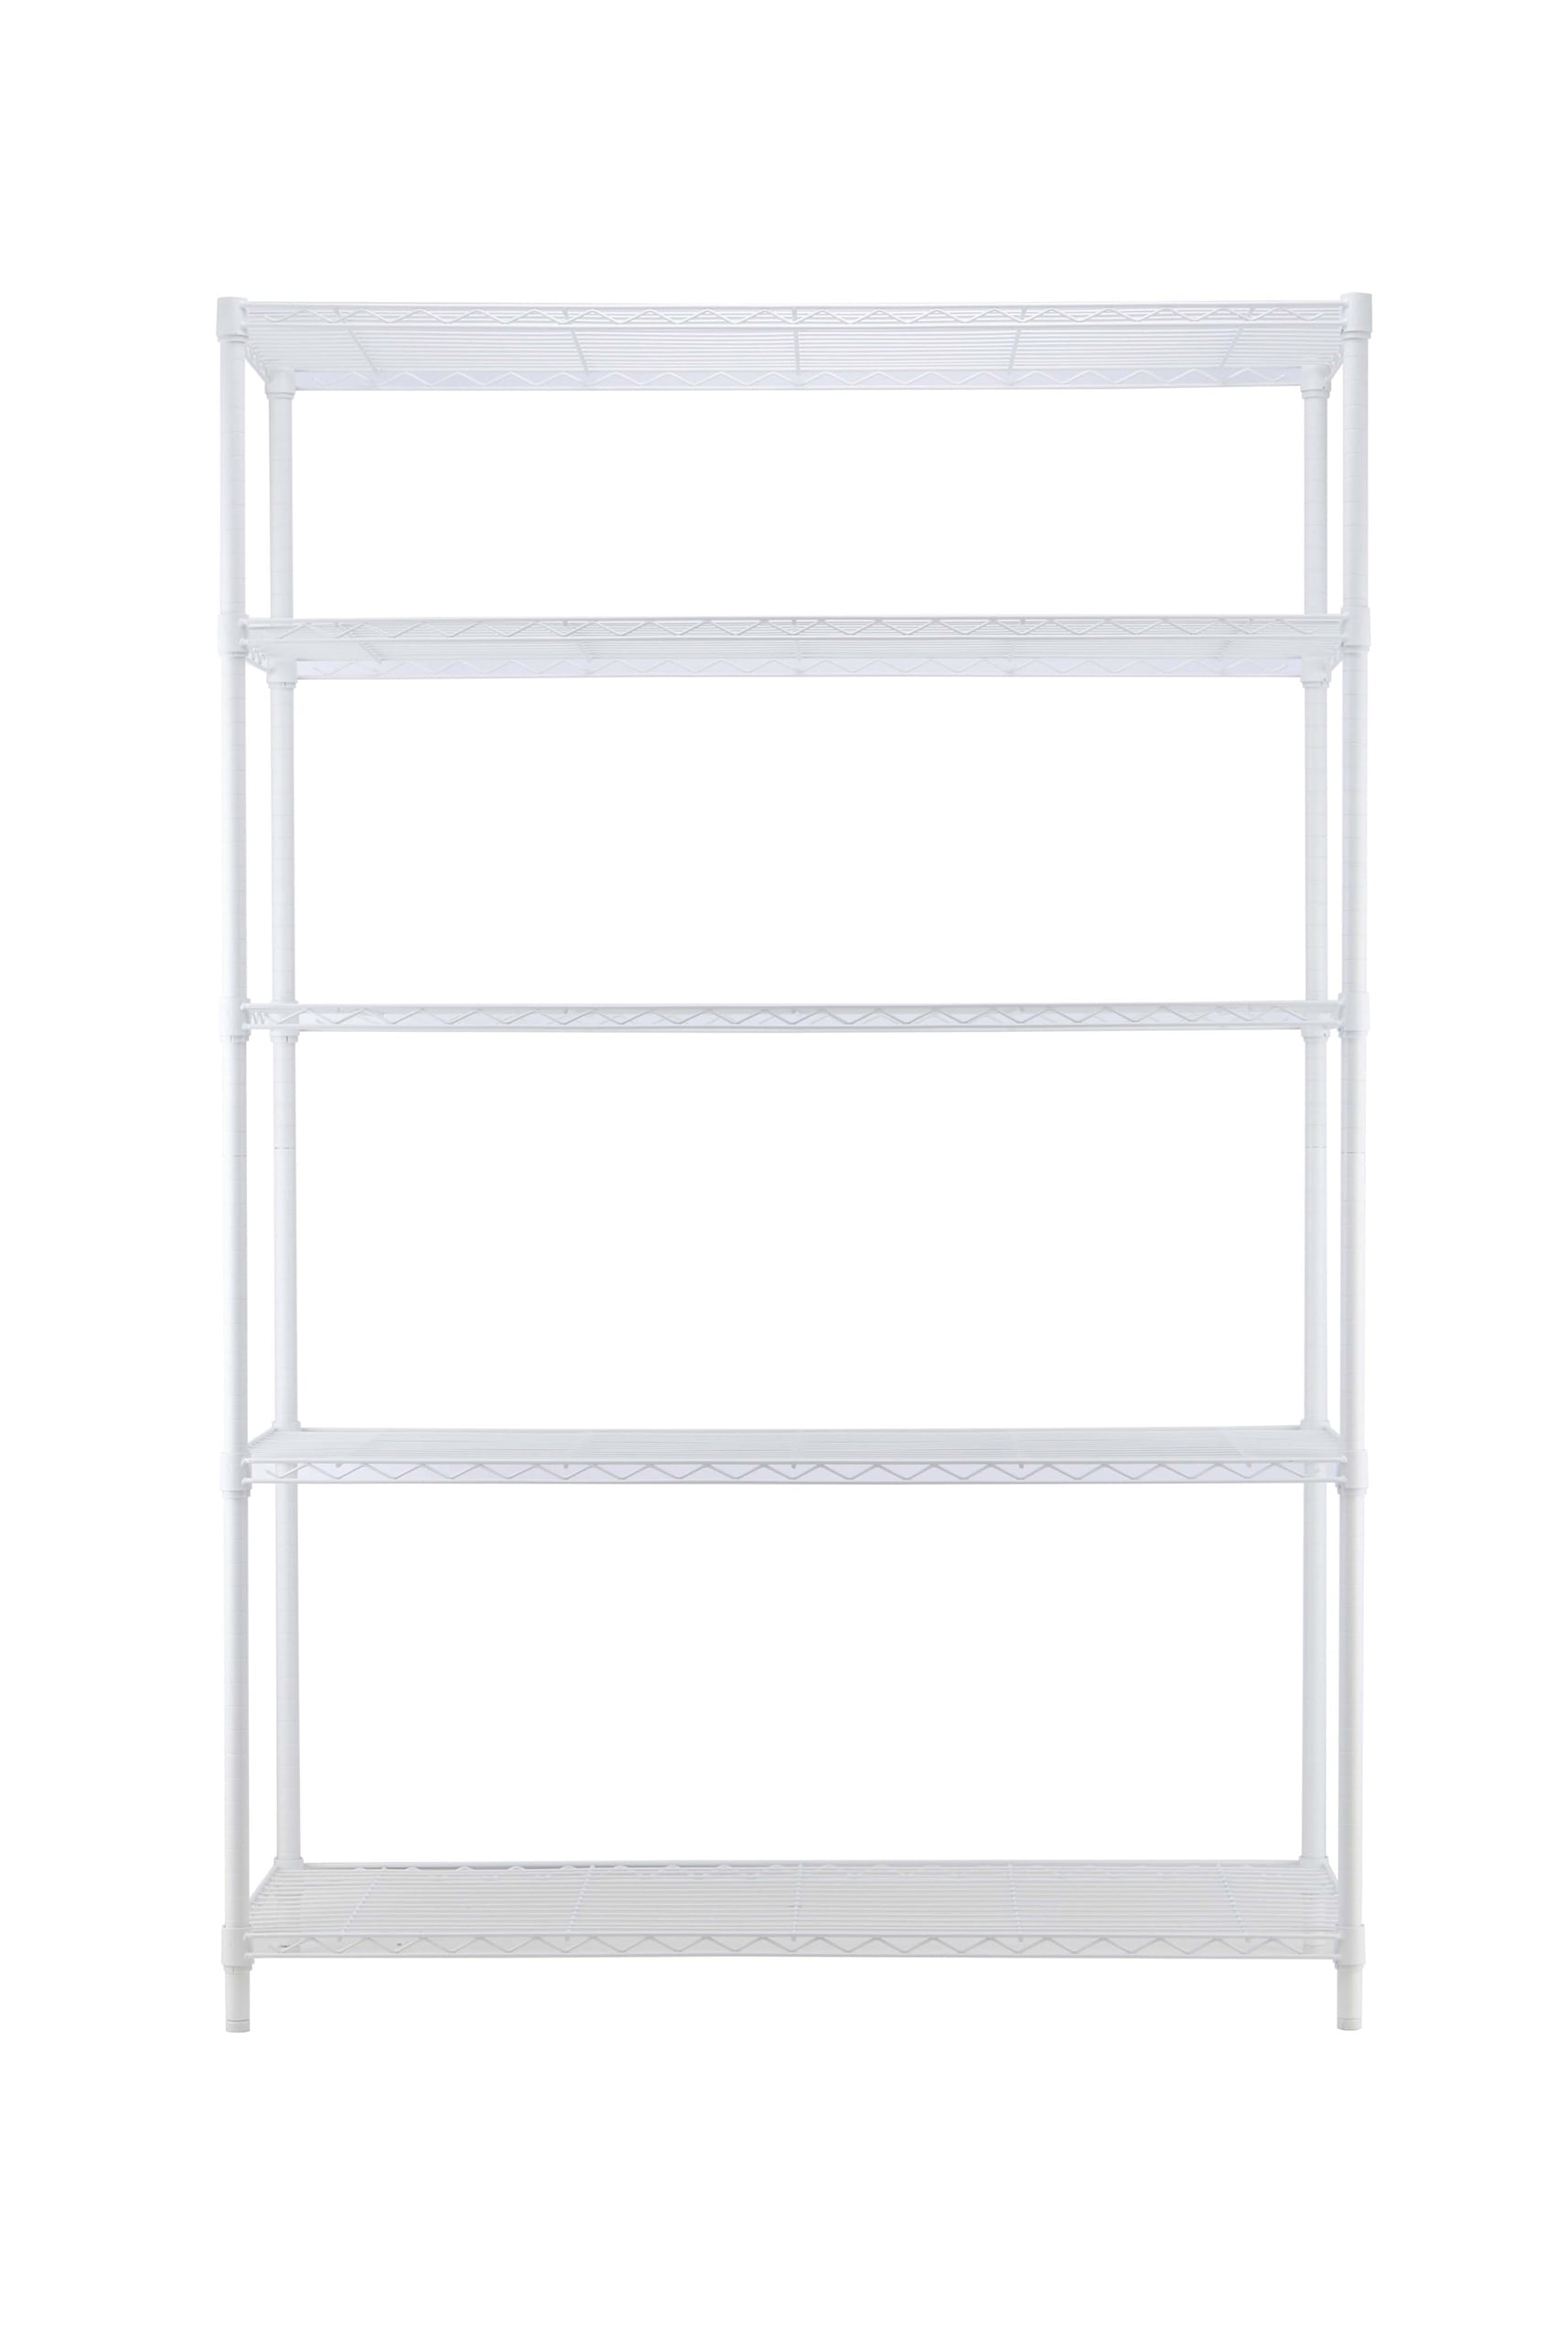 Home Decorators Collection 18 in. White Snap Install Hook Rack